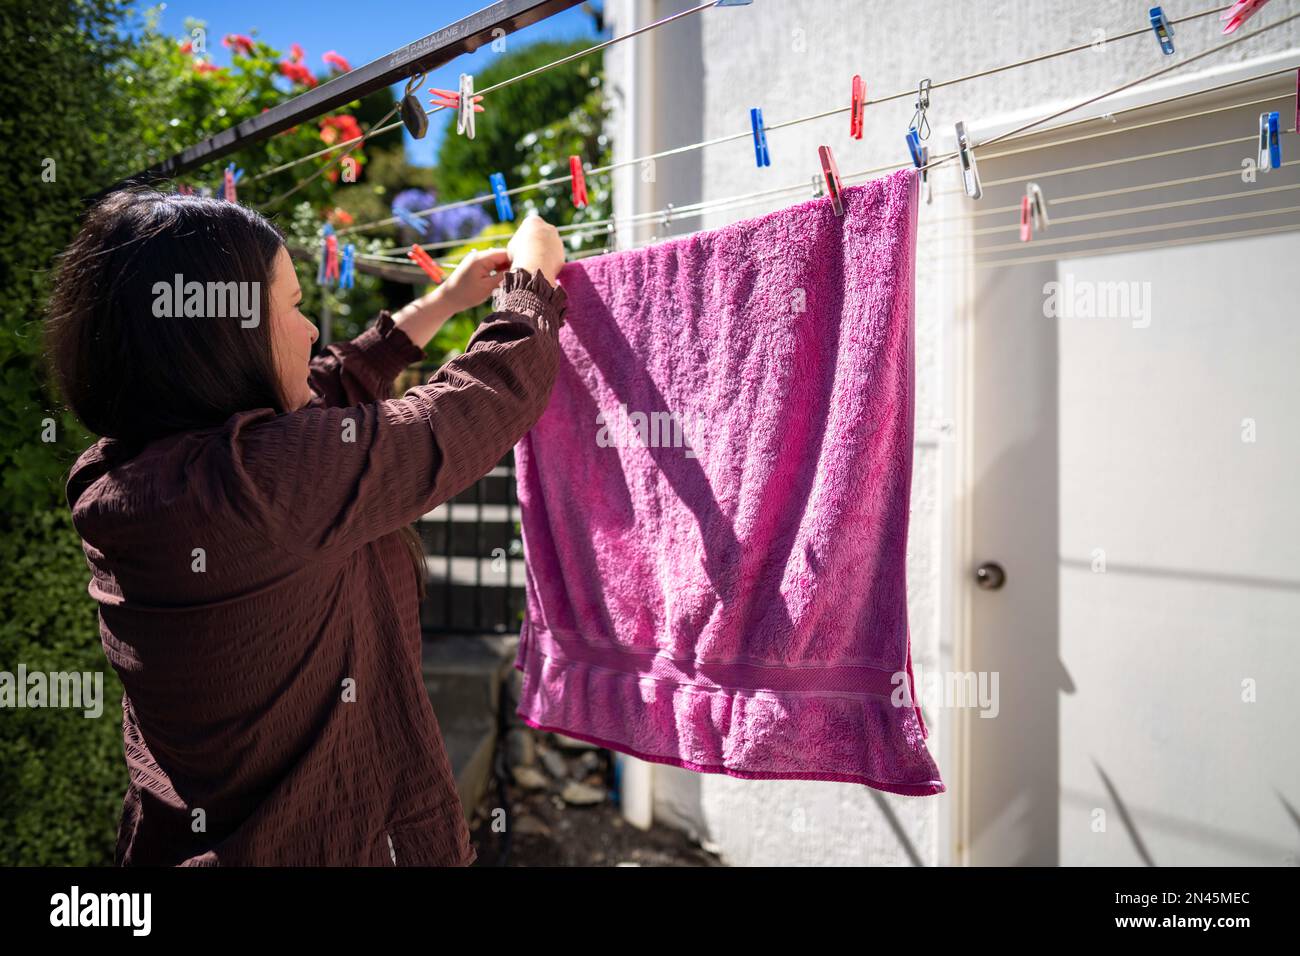 Drying clothes on a clothesline. drying a towel outside in Australia using pegs Stock Photo